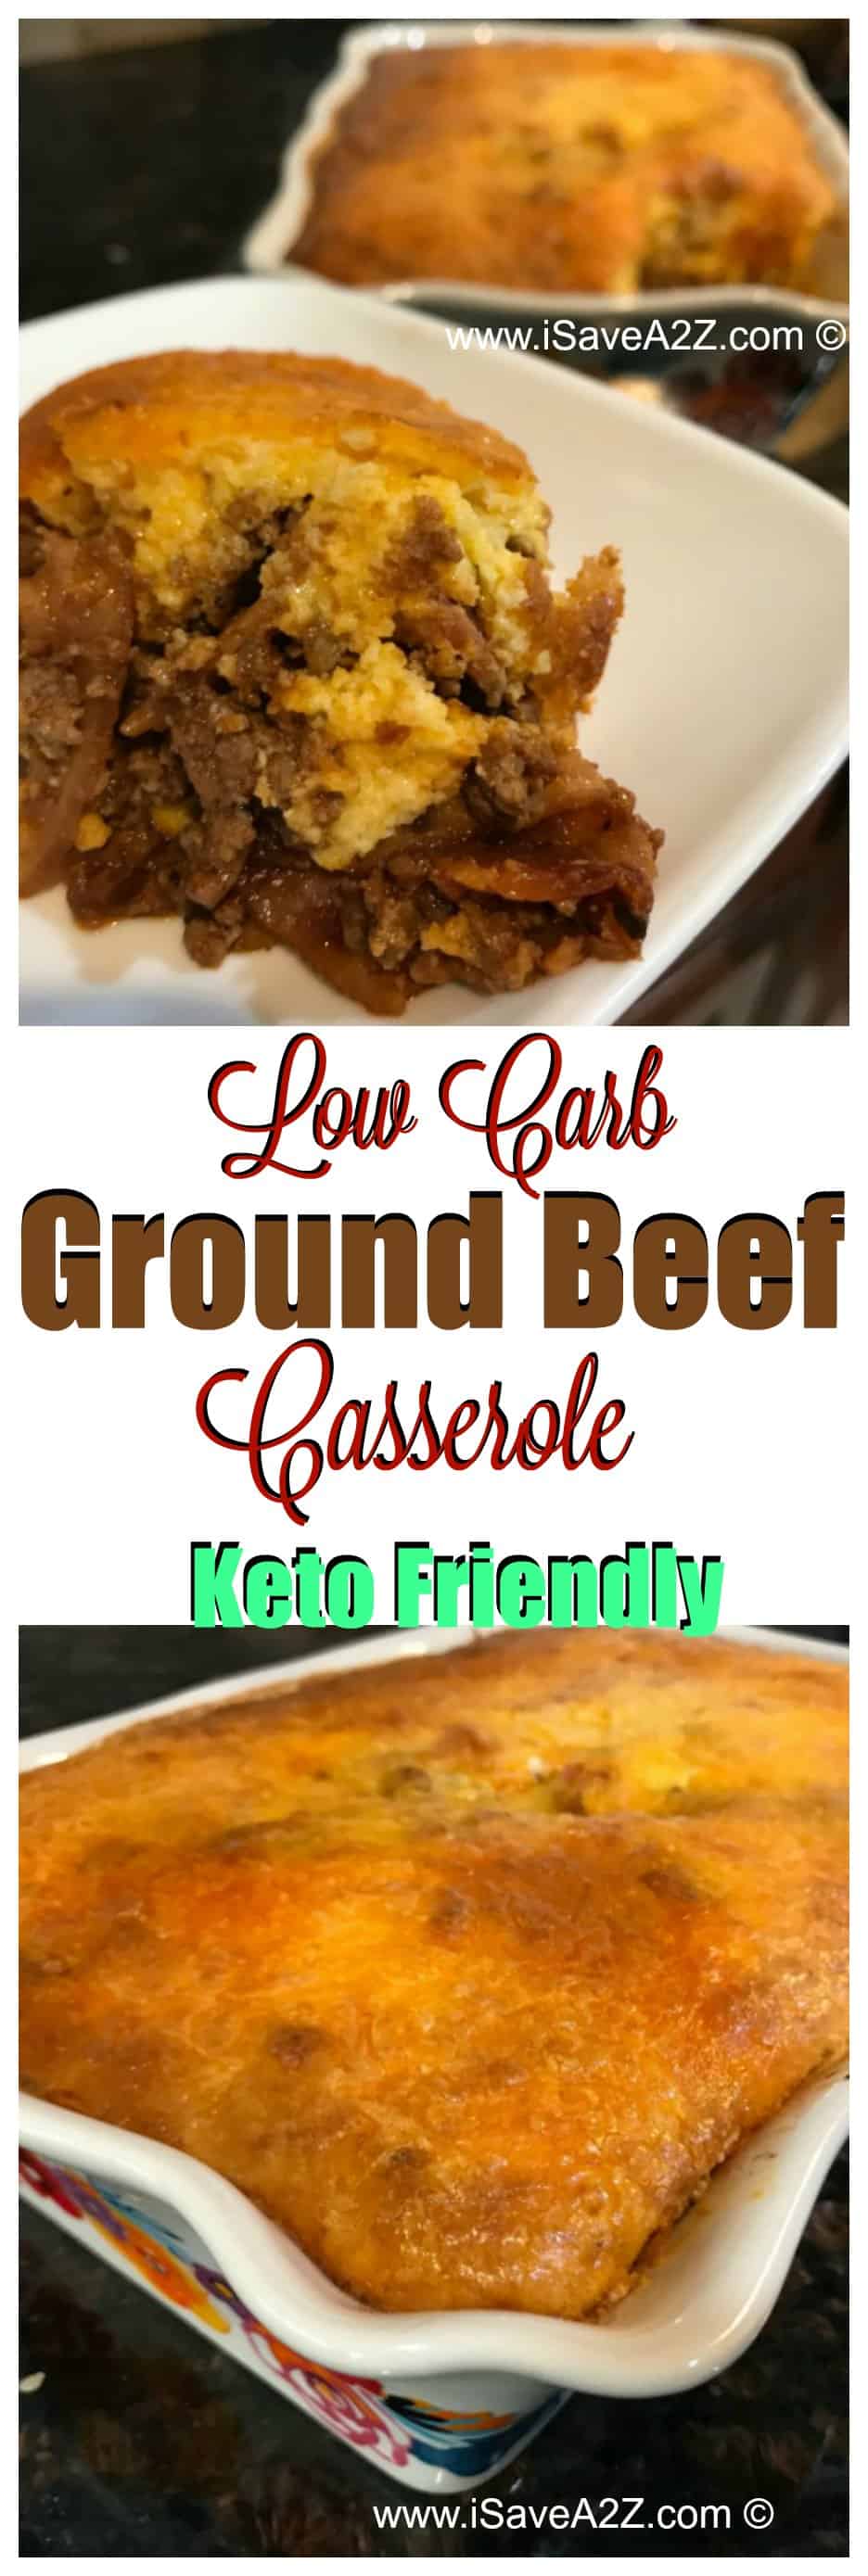 Low Carb Ground Beef Casserole Recipe that's Keto Friendly